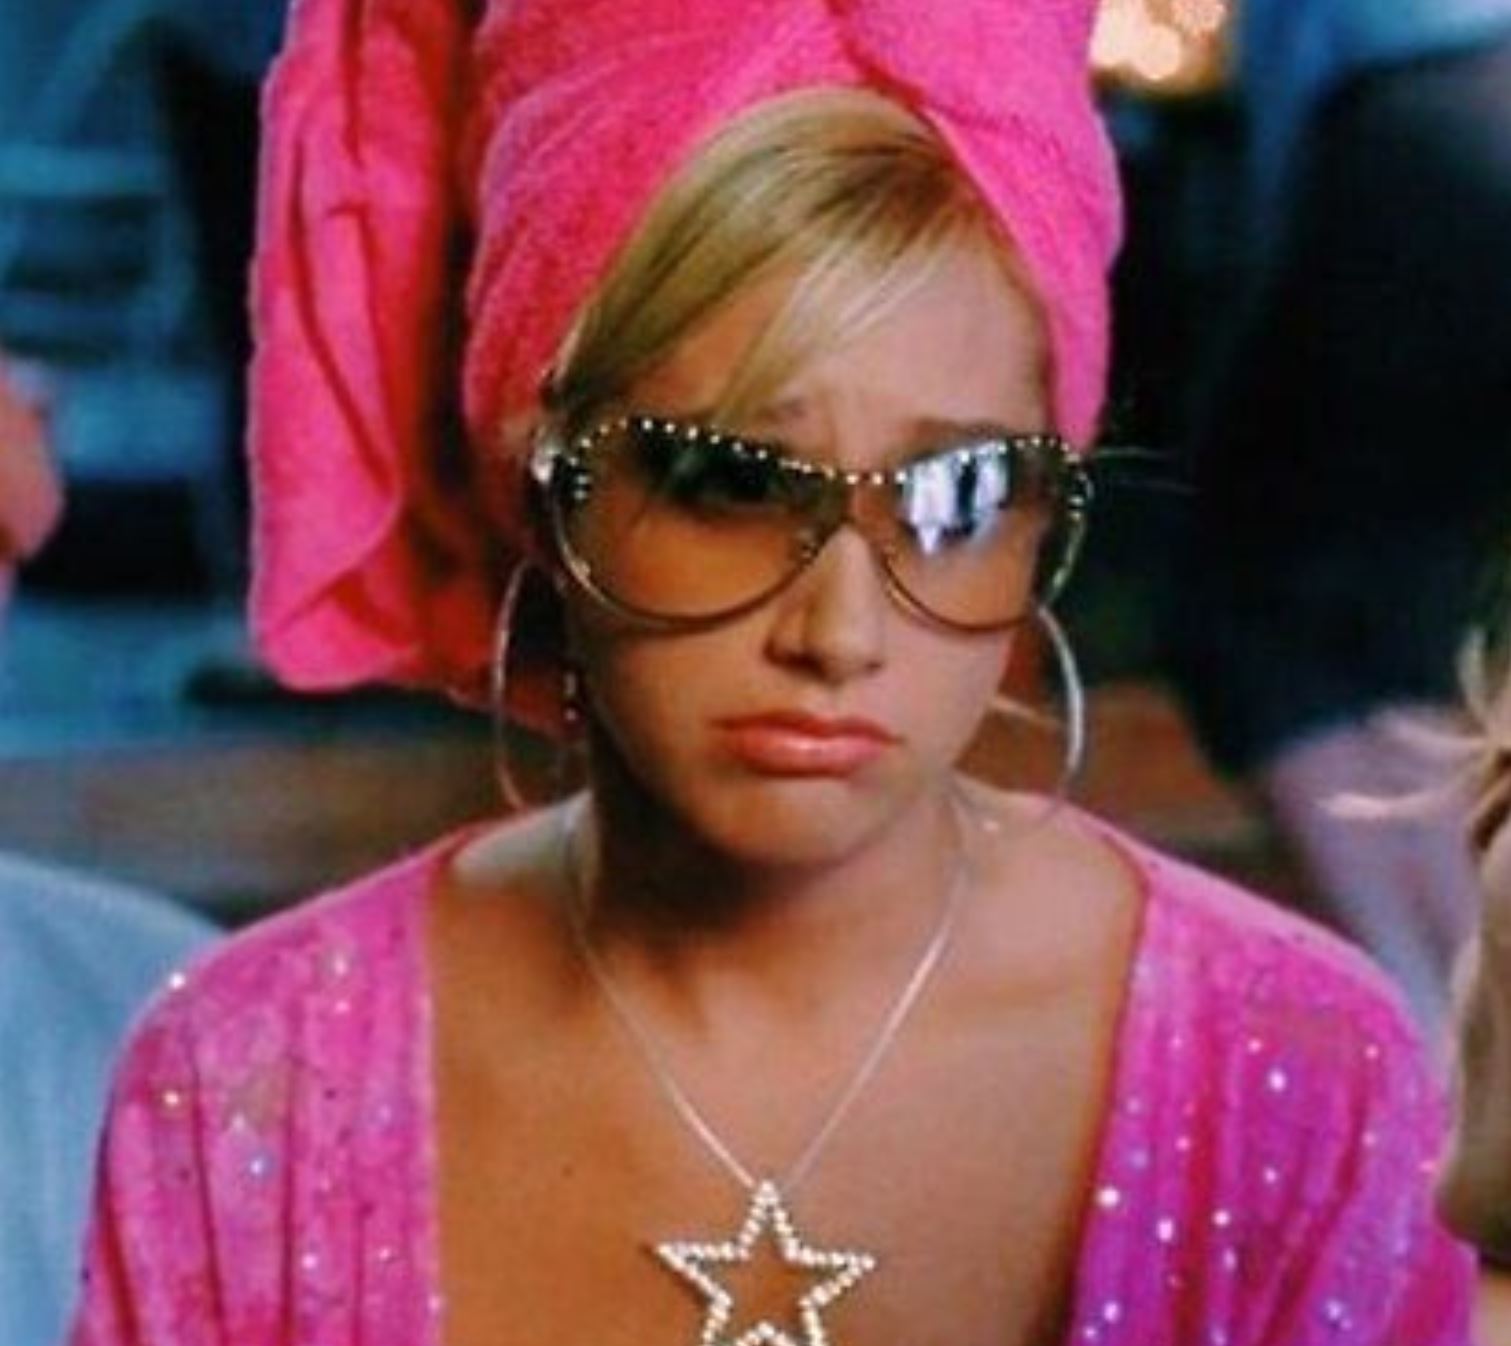 Sharpay from High School Musical looking sad, disappointed and lonely. Pink towel wrap and pink dressing gown with a star necklace.